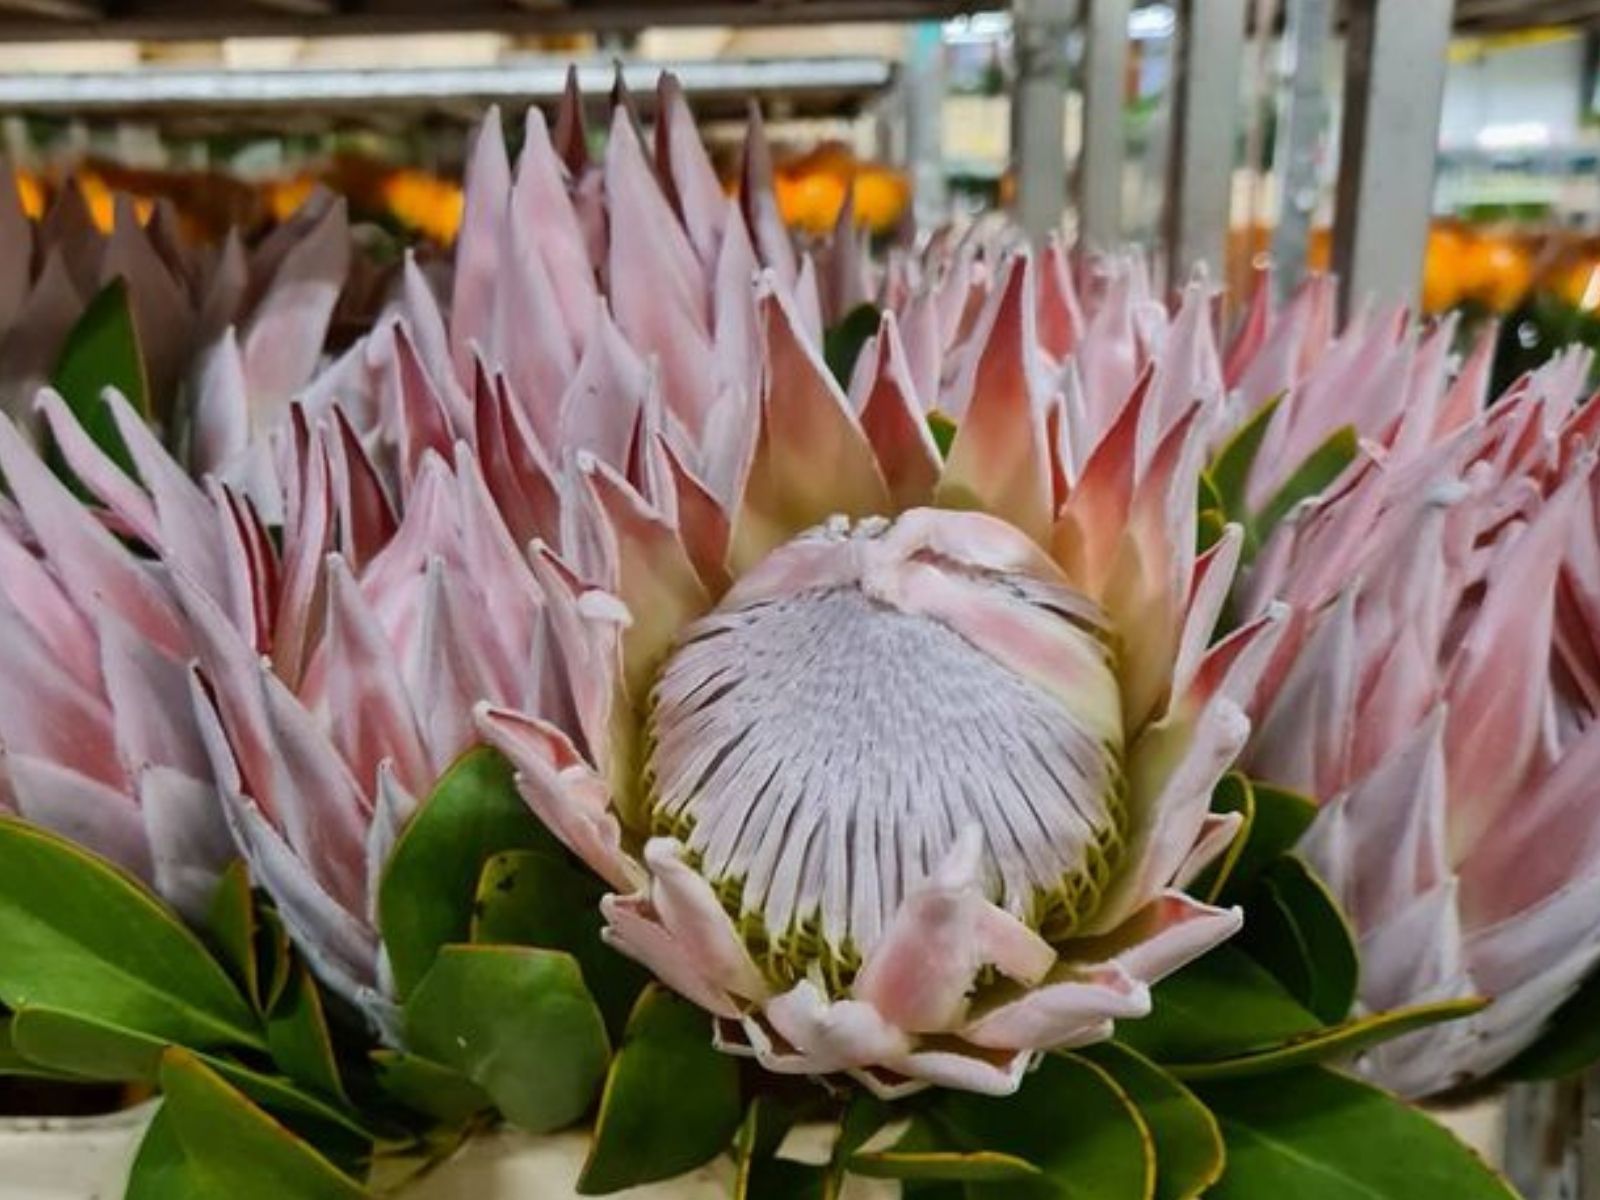 Protea from Duif Flowers on Thursd